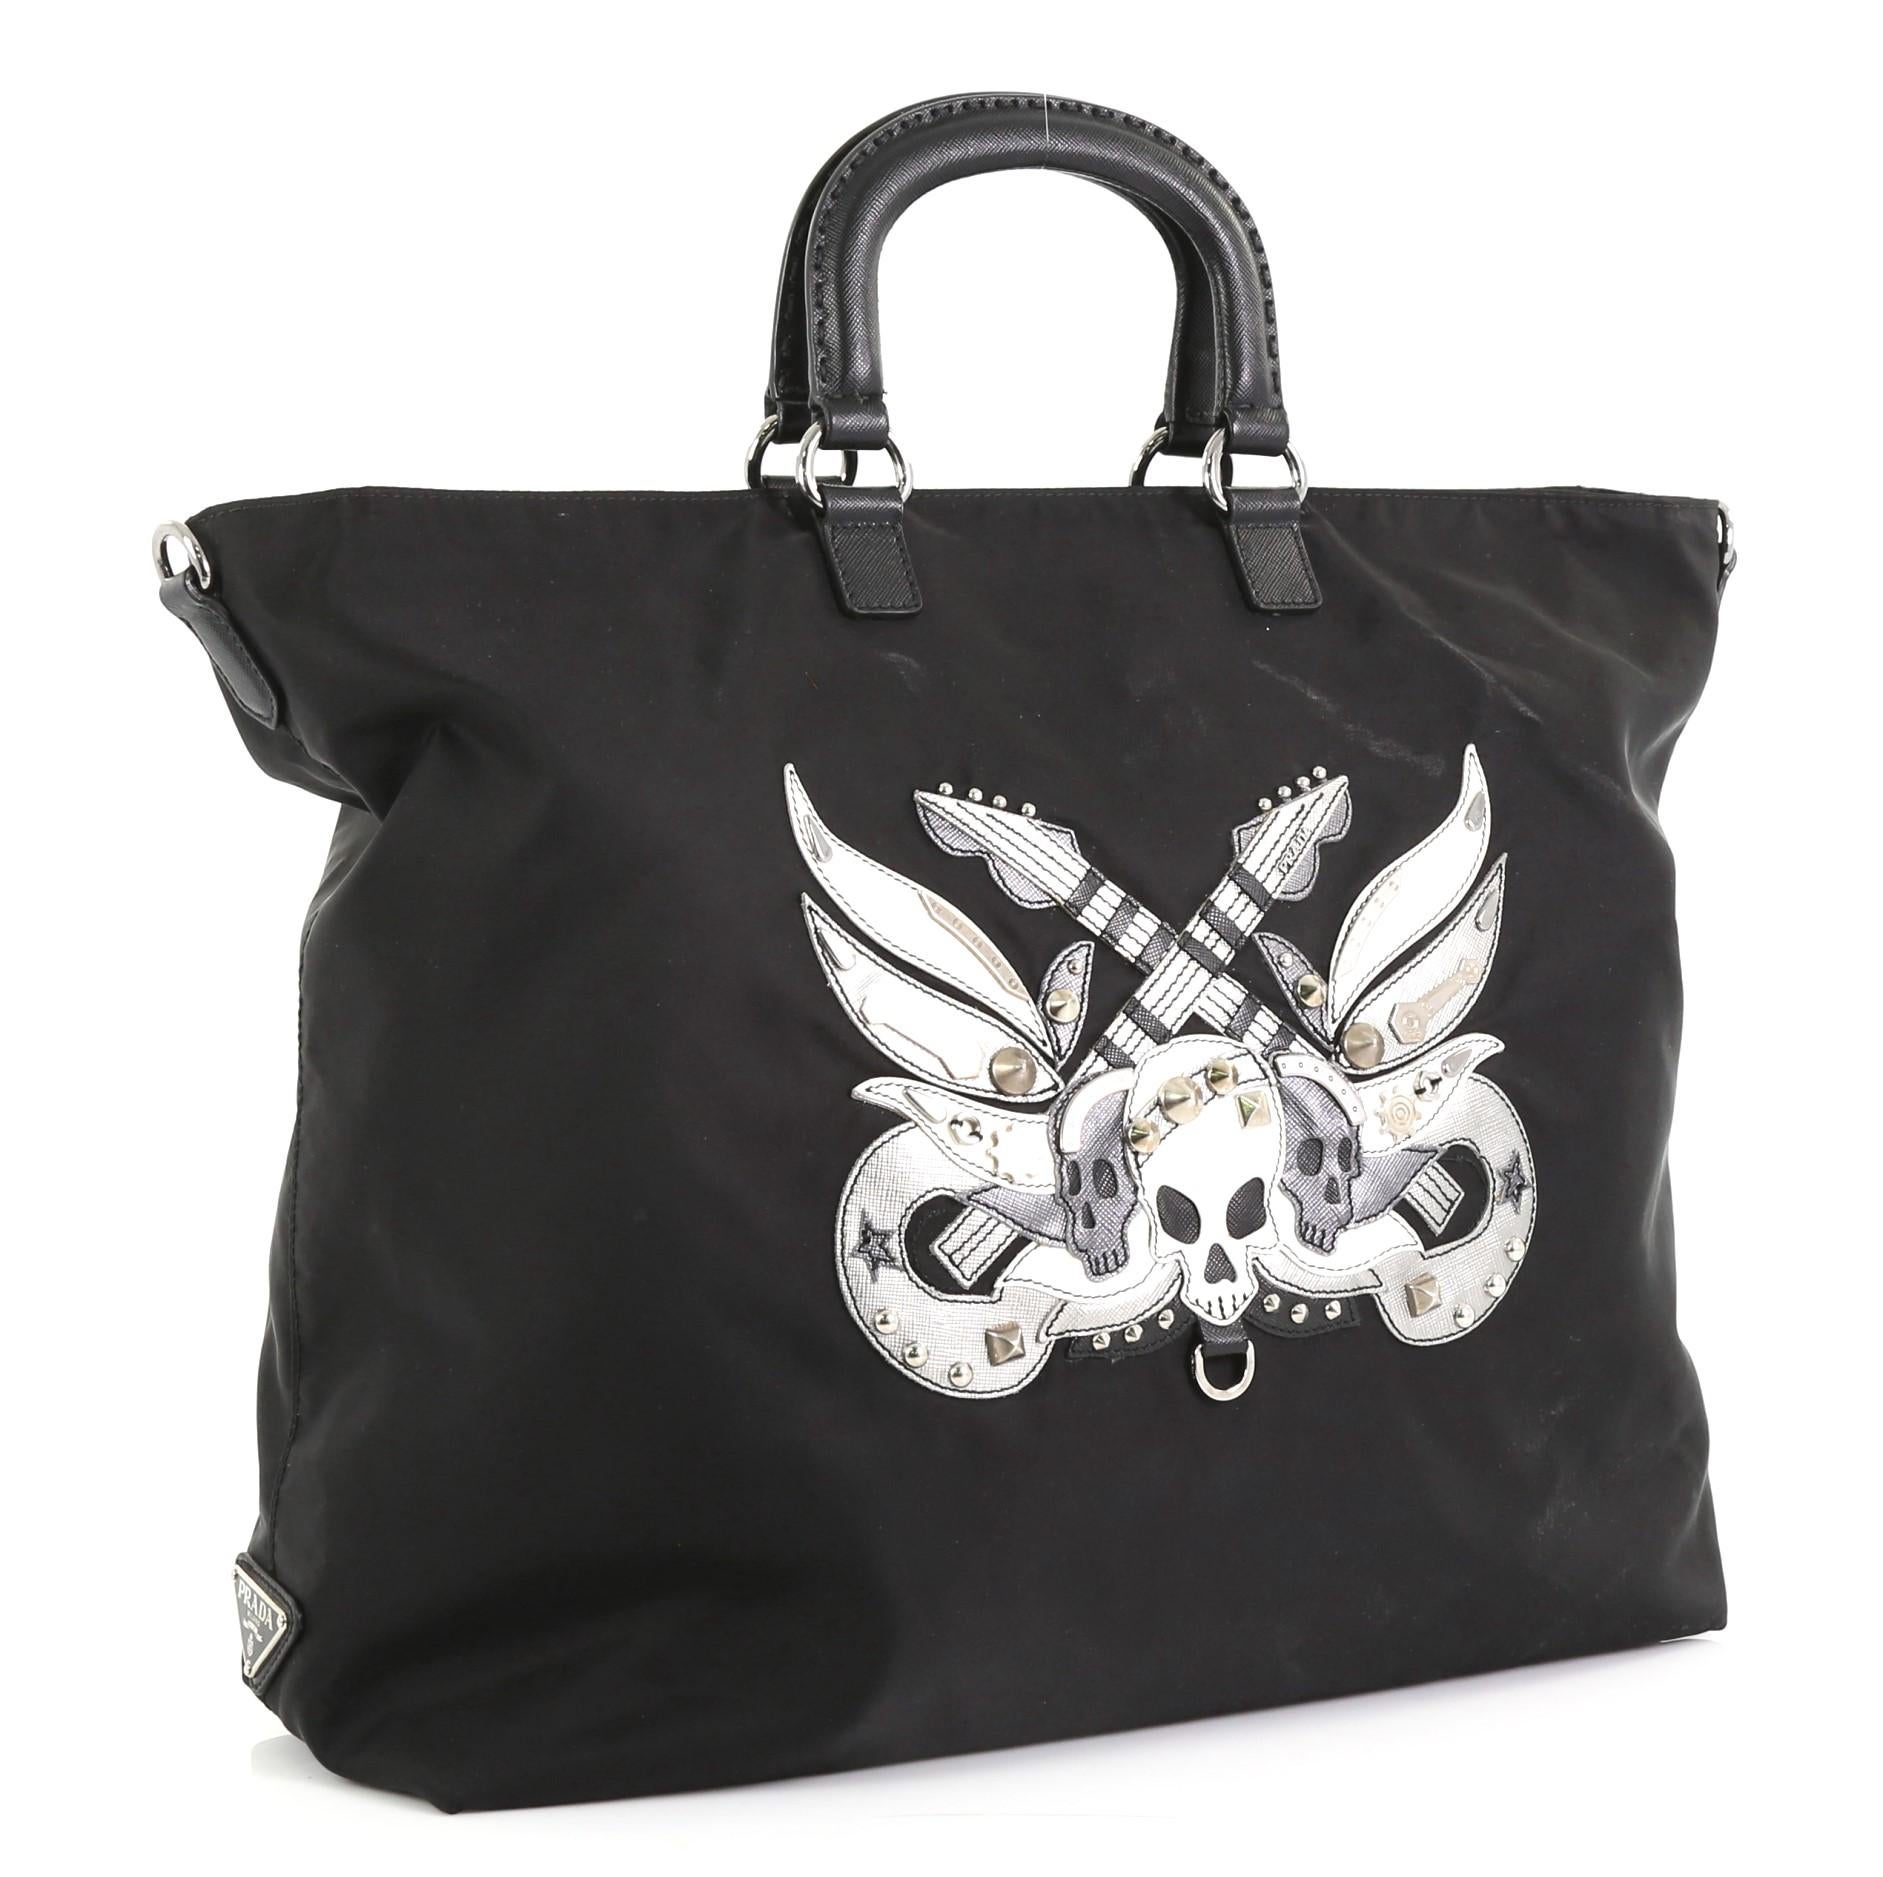 This Prada Convertible Skull Tote Tessuto with Studded Saffiano Leather Large, crafted from black tessuto with studded black saffiano leather, features a stunning skull and guitar leather applique, dual-top leather handles, raised Prada logo and